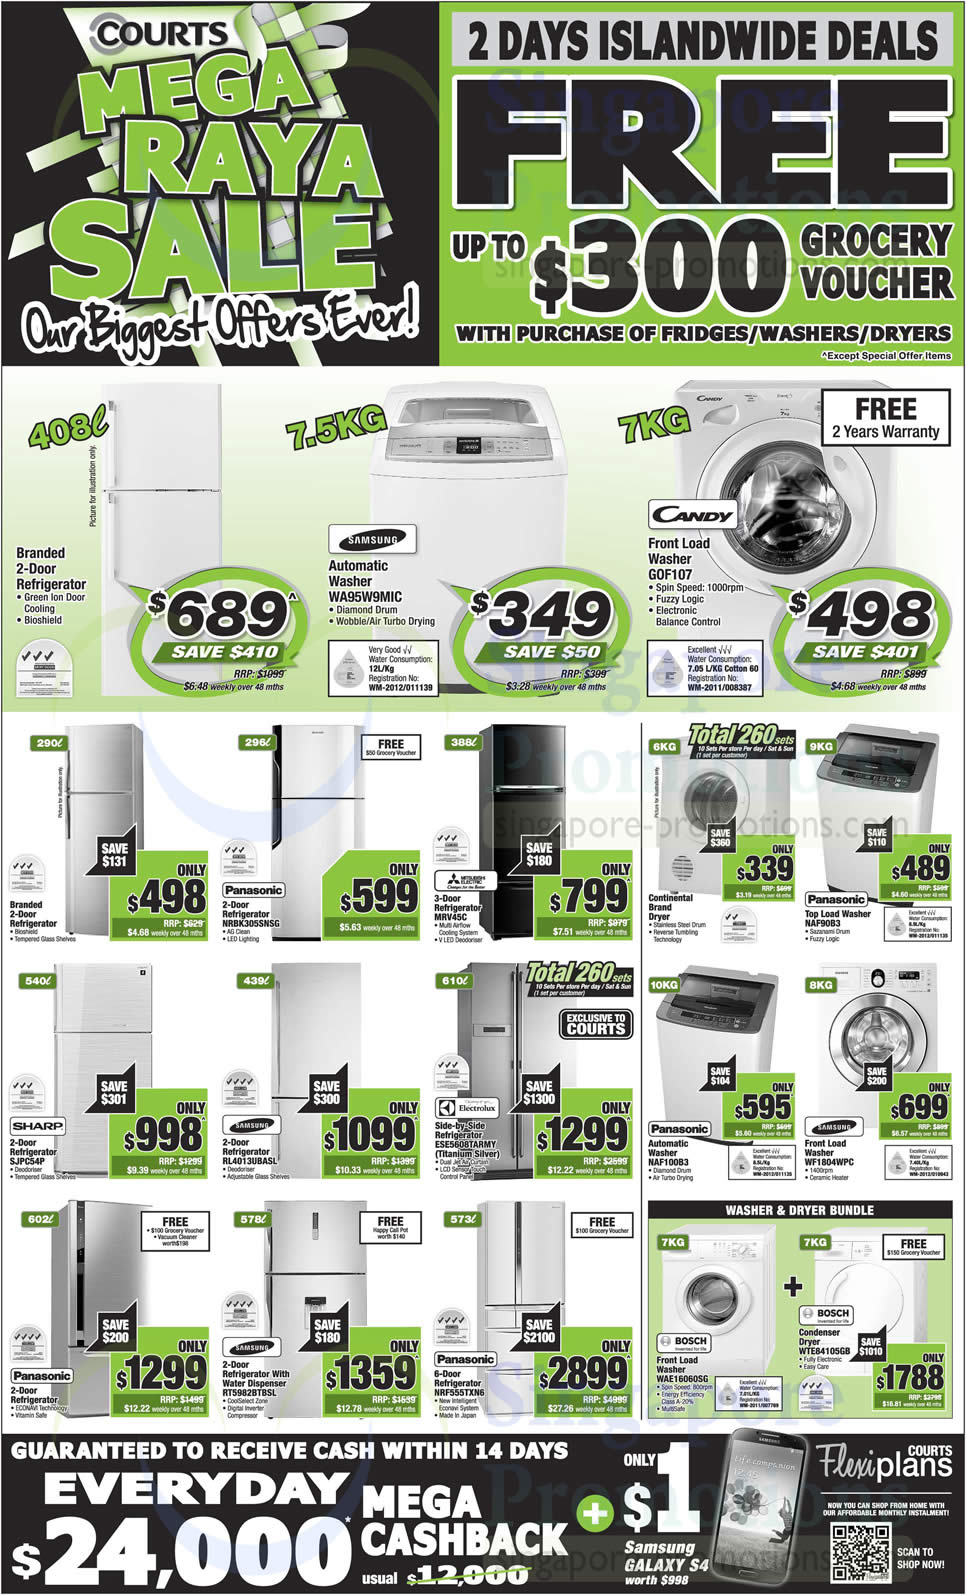 Featured image for Courts Mega Raya Sale 13 - 14 Jul 2013